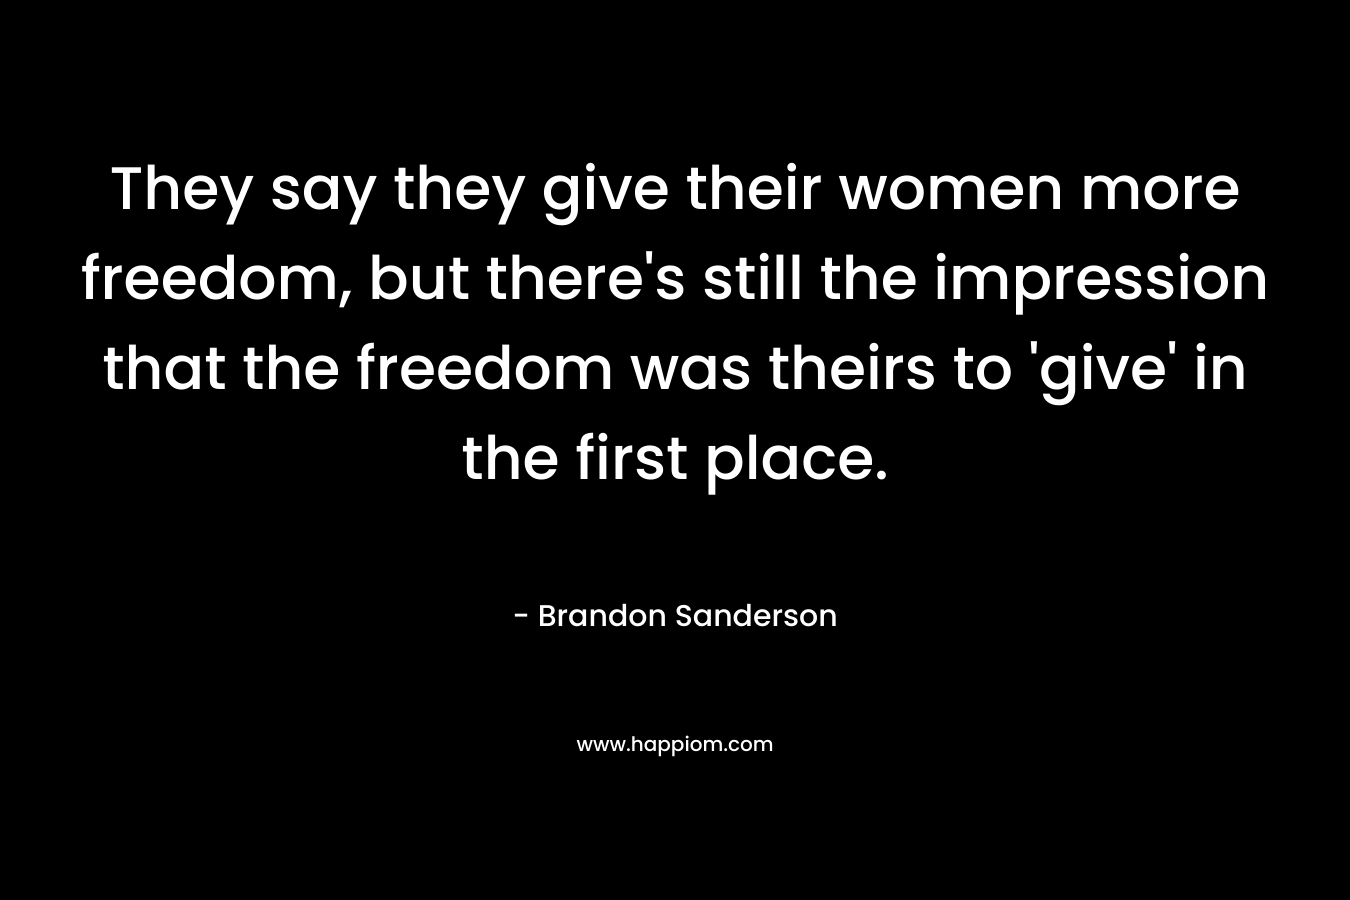 They say they give their women more freedom, but there's still the impression that the freedom was theirs to 'give' in the first place.